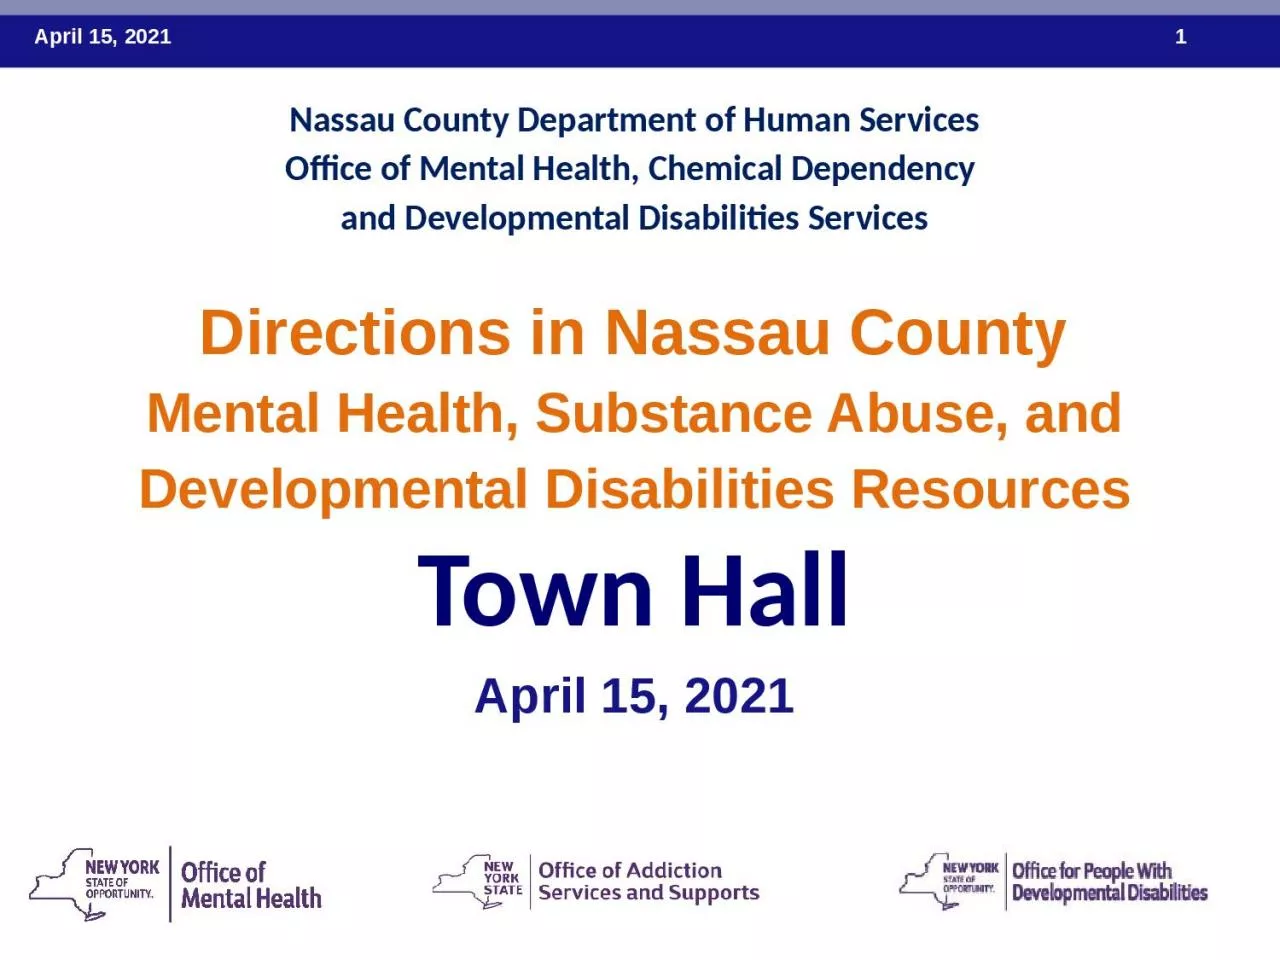 Nassau County Department of Human Services